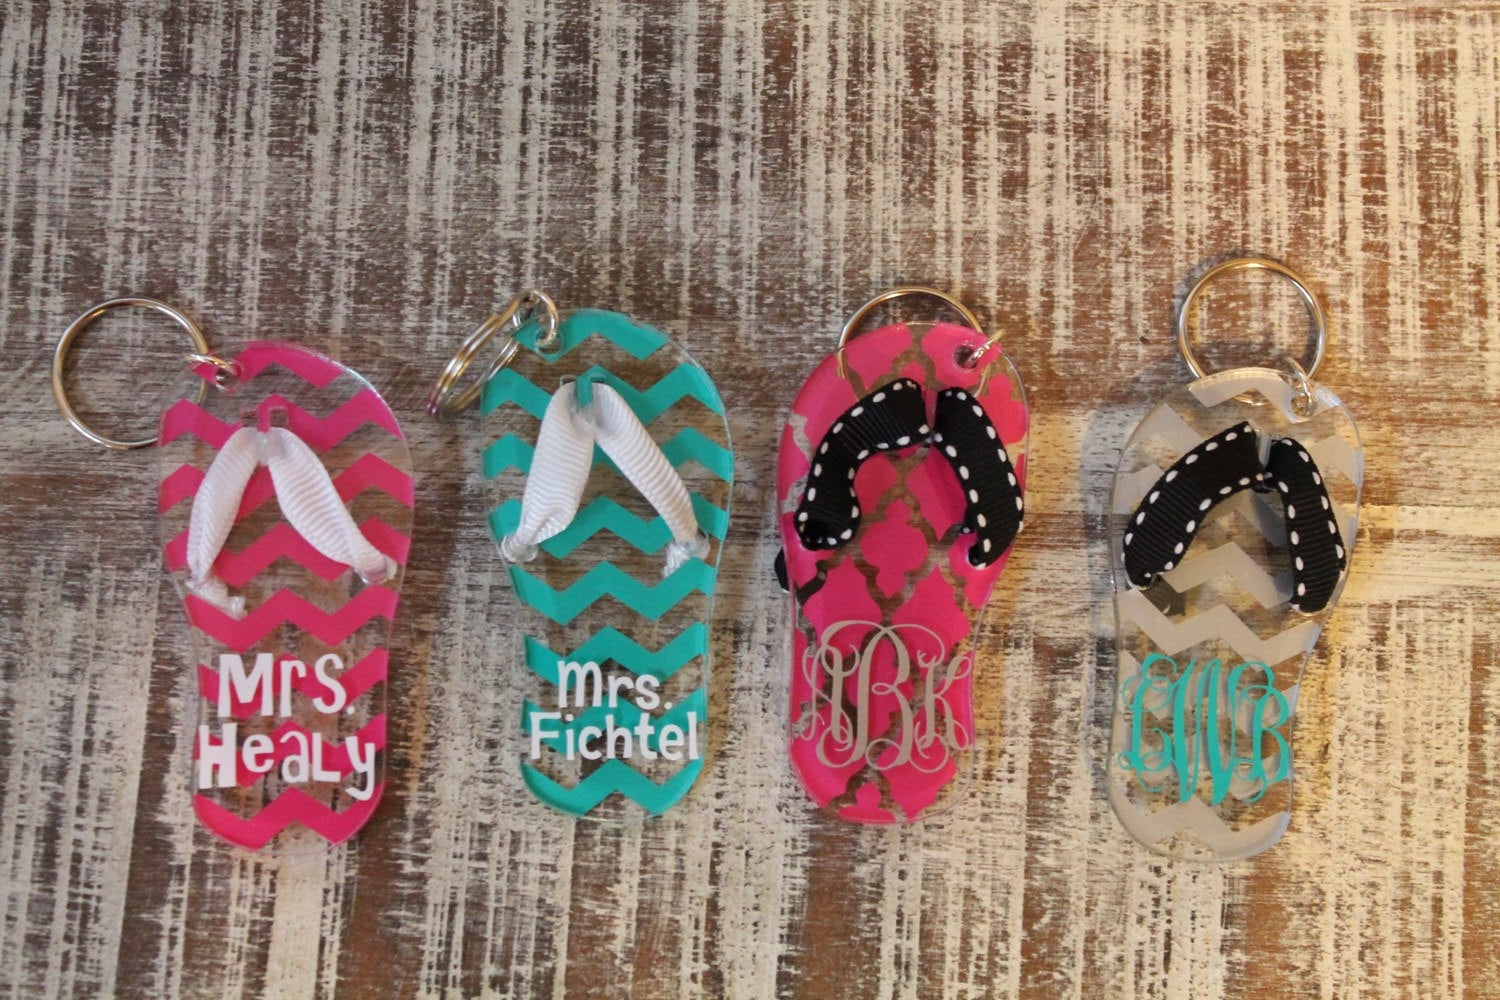 Flip flop Keychain Personalized - Shapes - Flip Flop - Sandle - Party Favors - Wedding Favor - Birthday - Thank You Gift - Teacher - Monogra